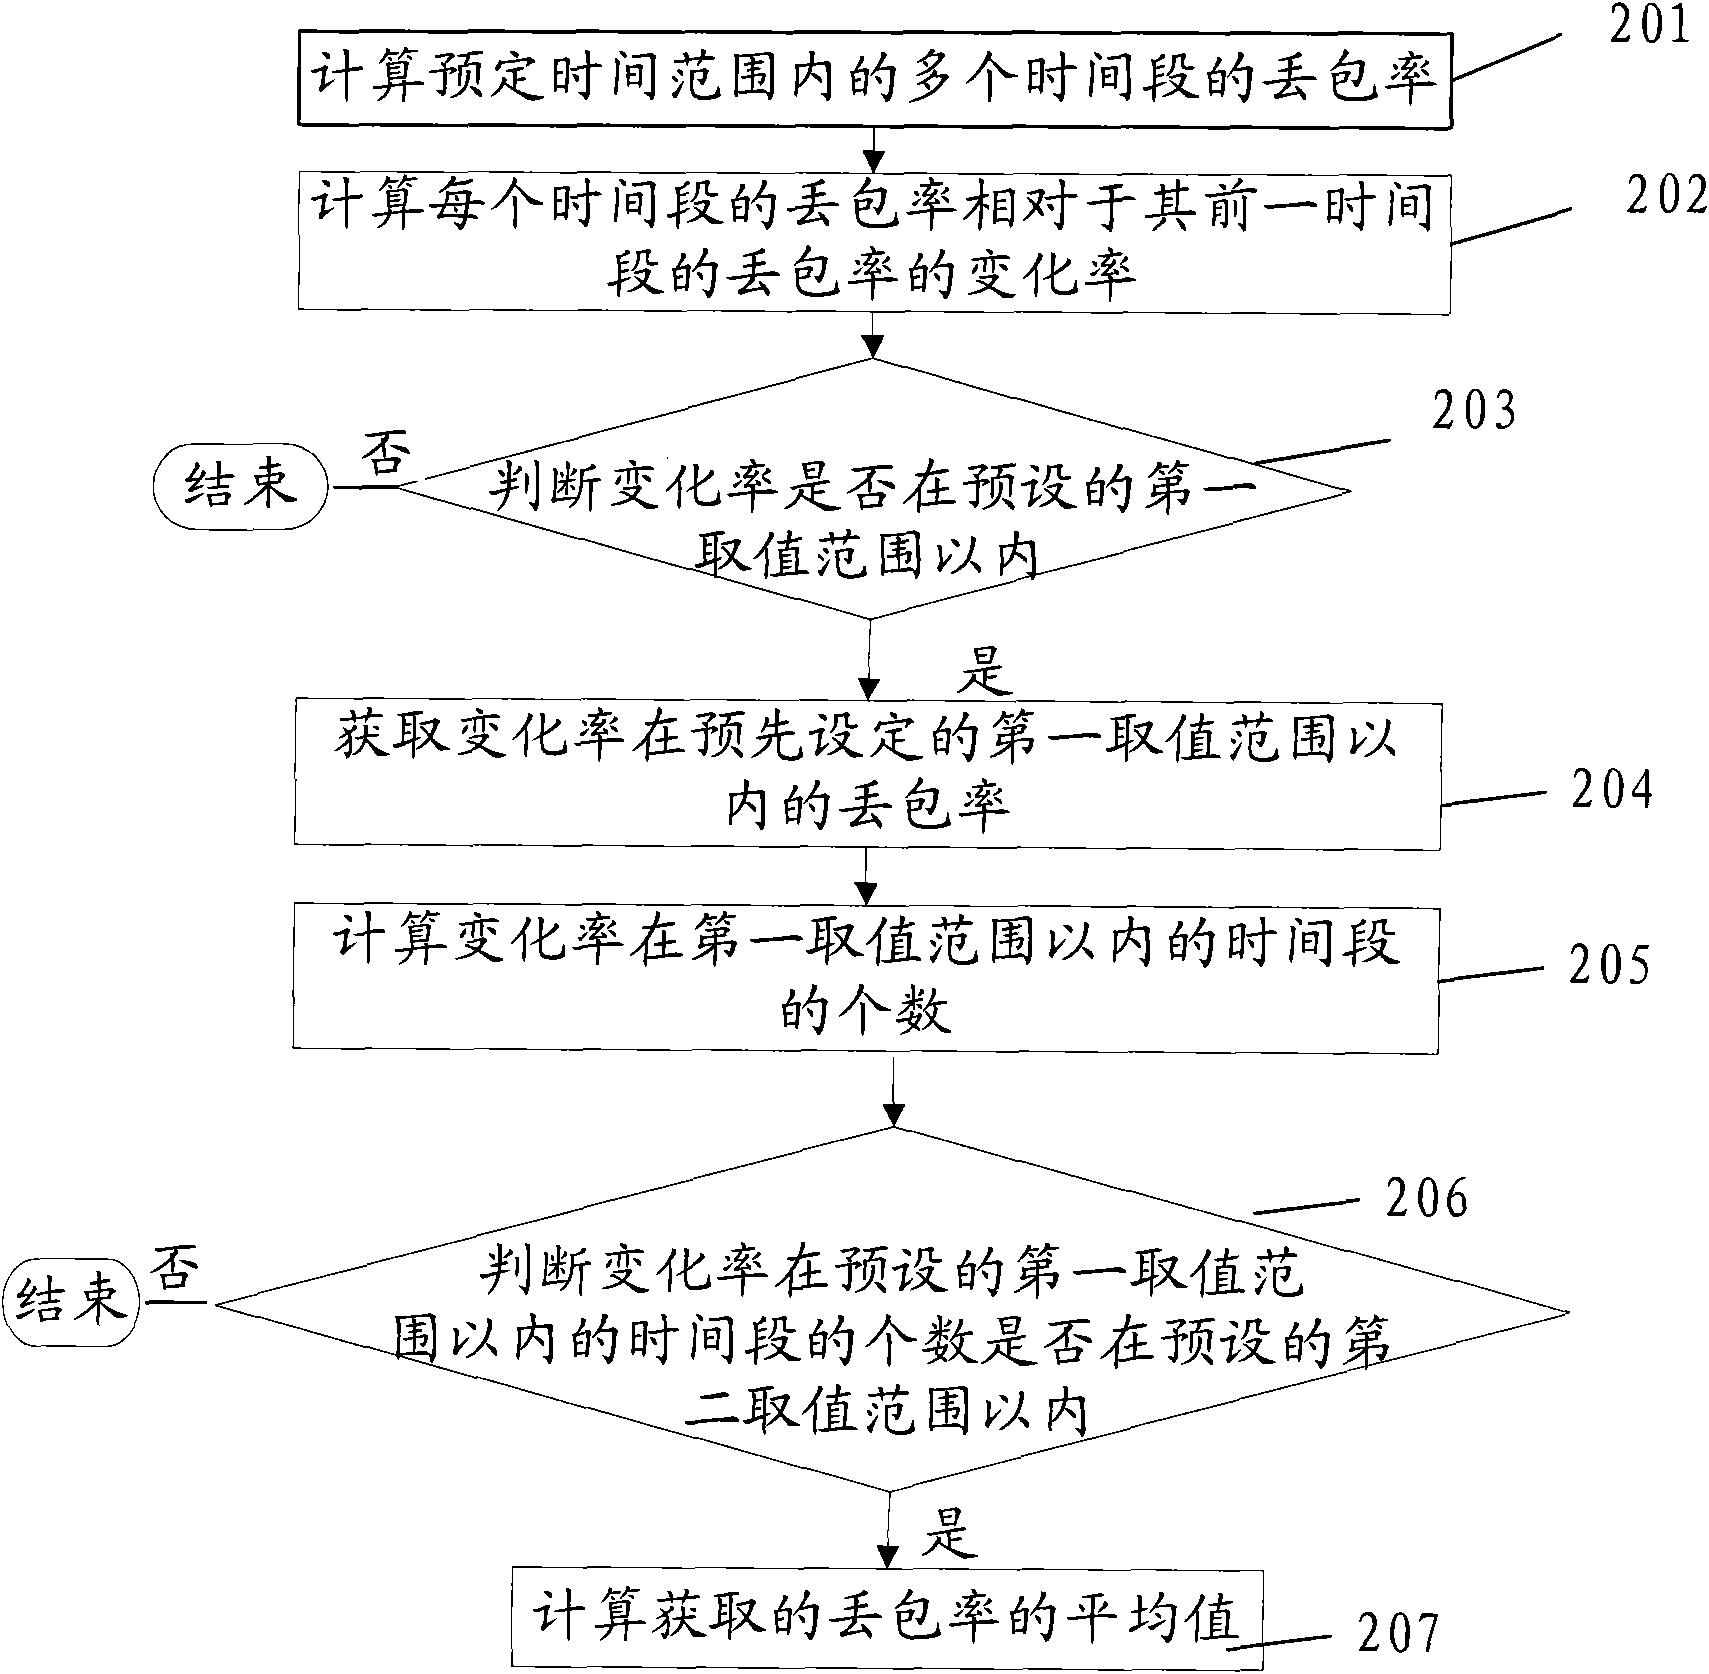 Method and device for calculating packet loss rate as well as method and device for controlling network transmission